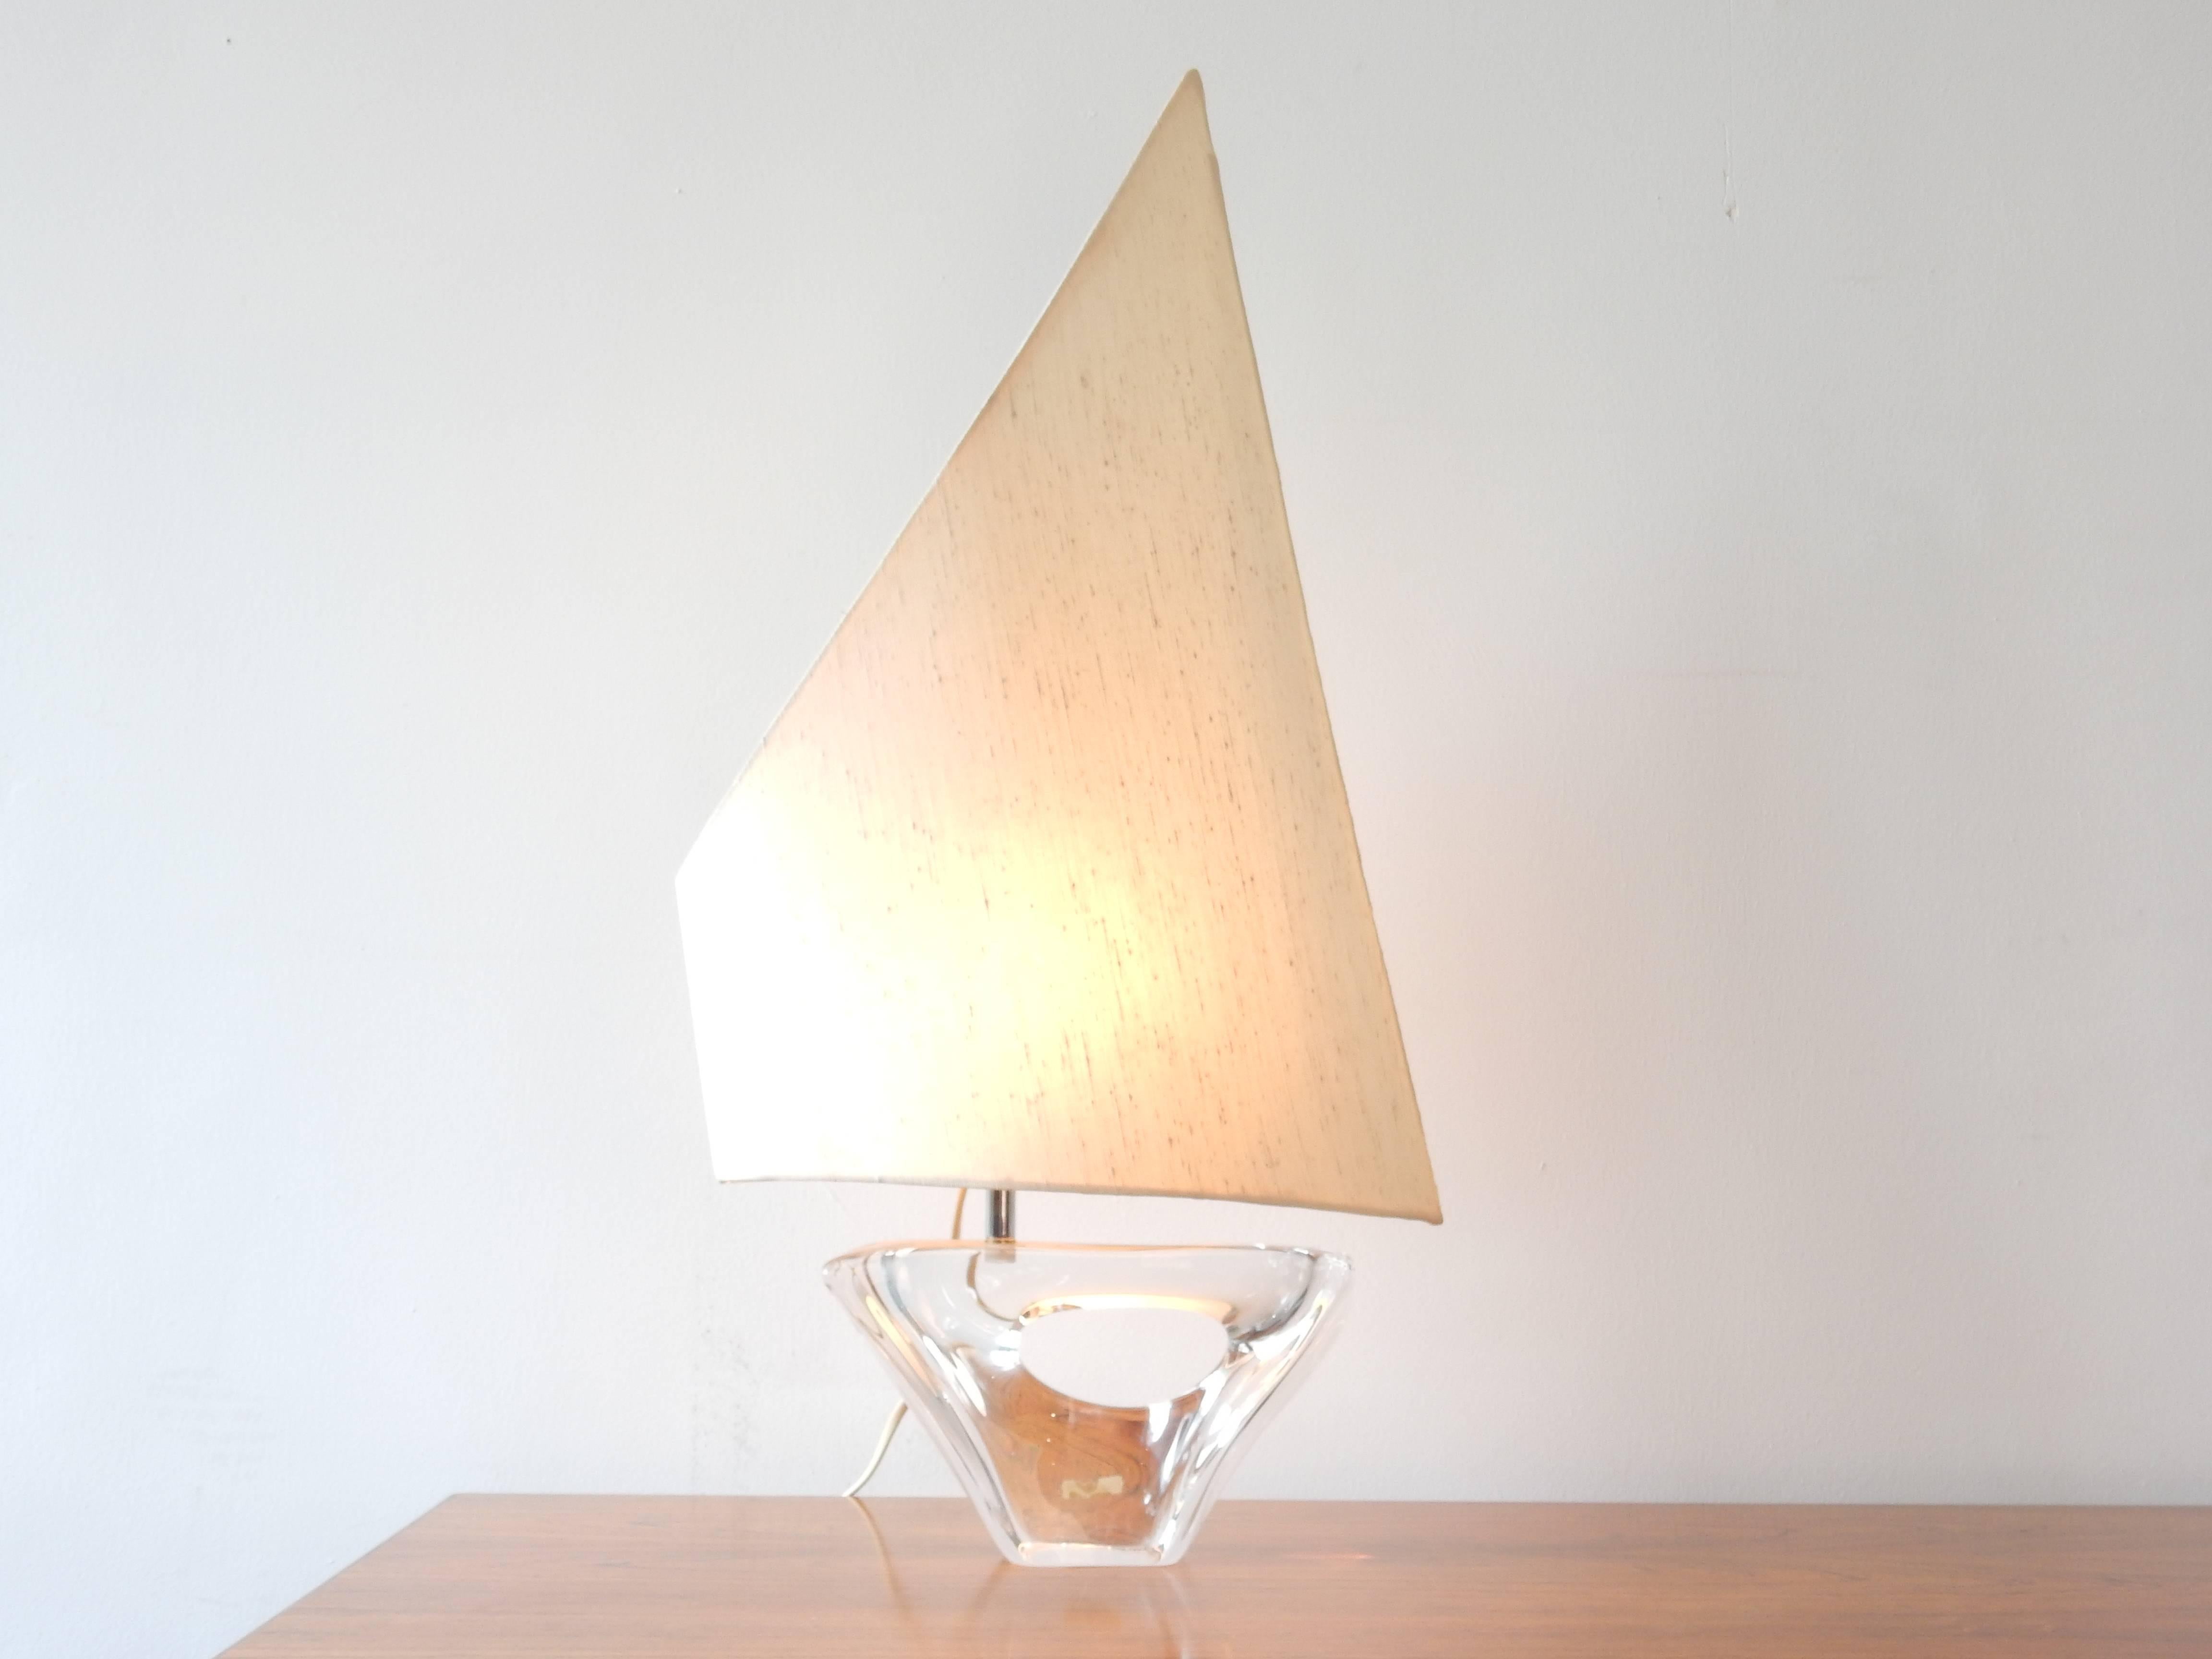 Crystal Sailboat Shaped Table Light by Daum, Signed and Labelled, France, 1950s